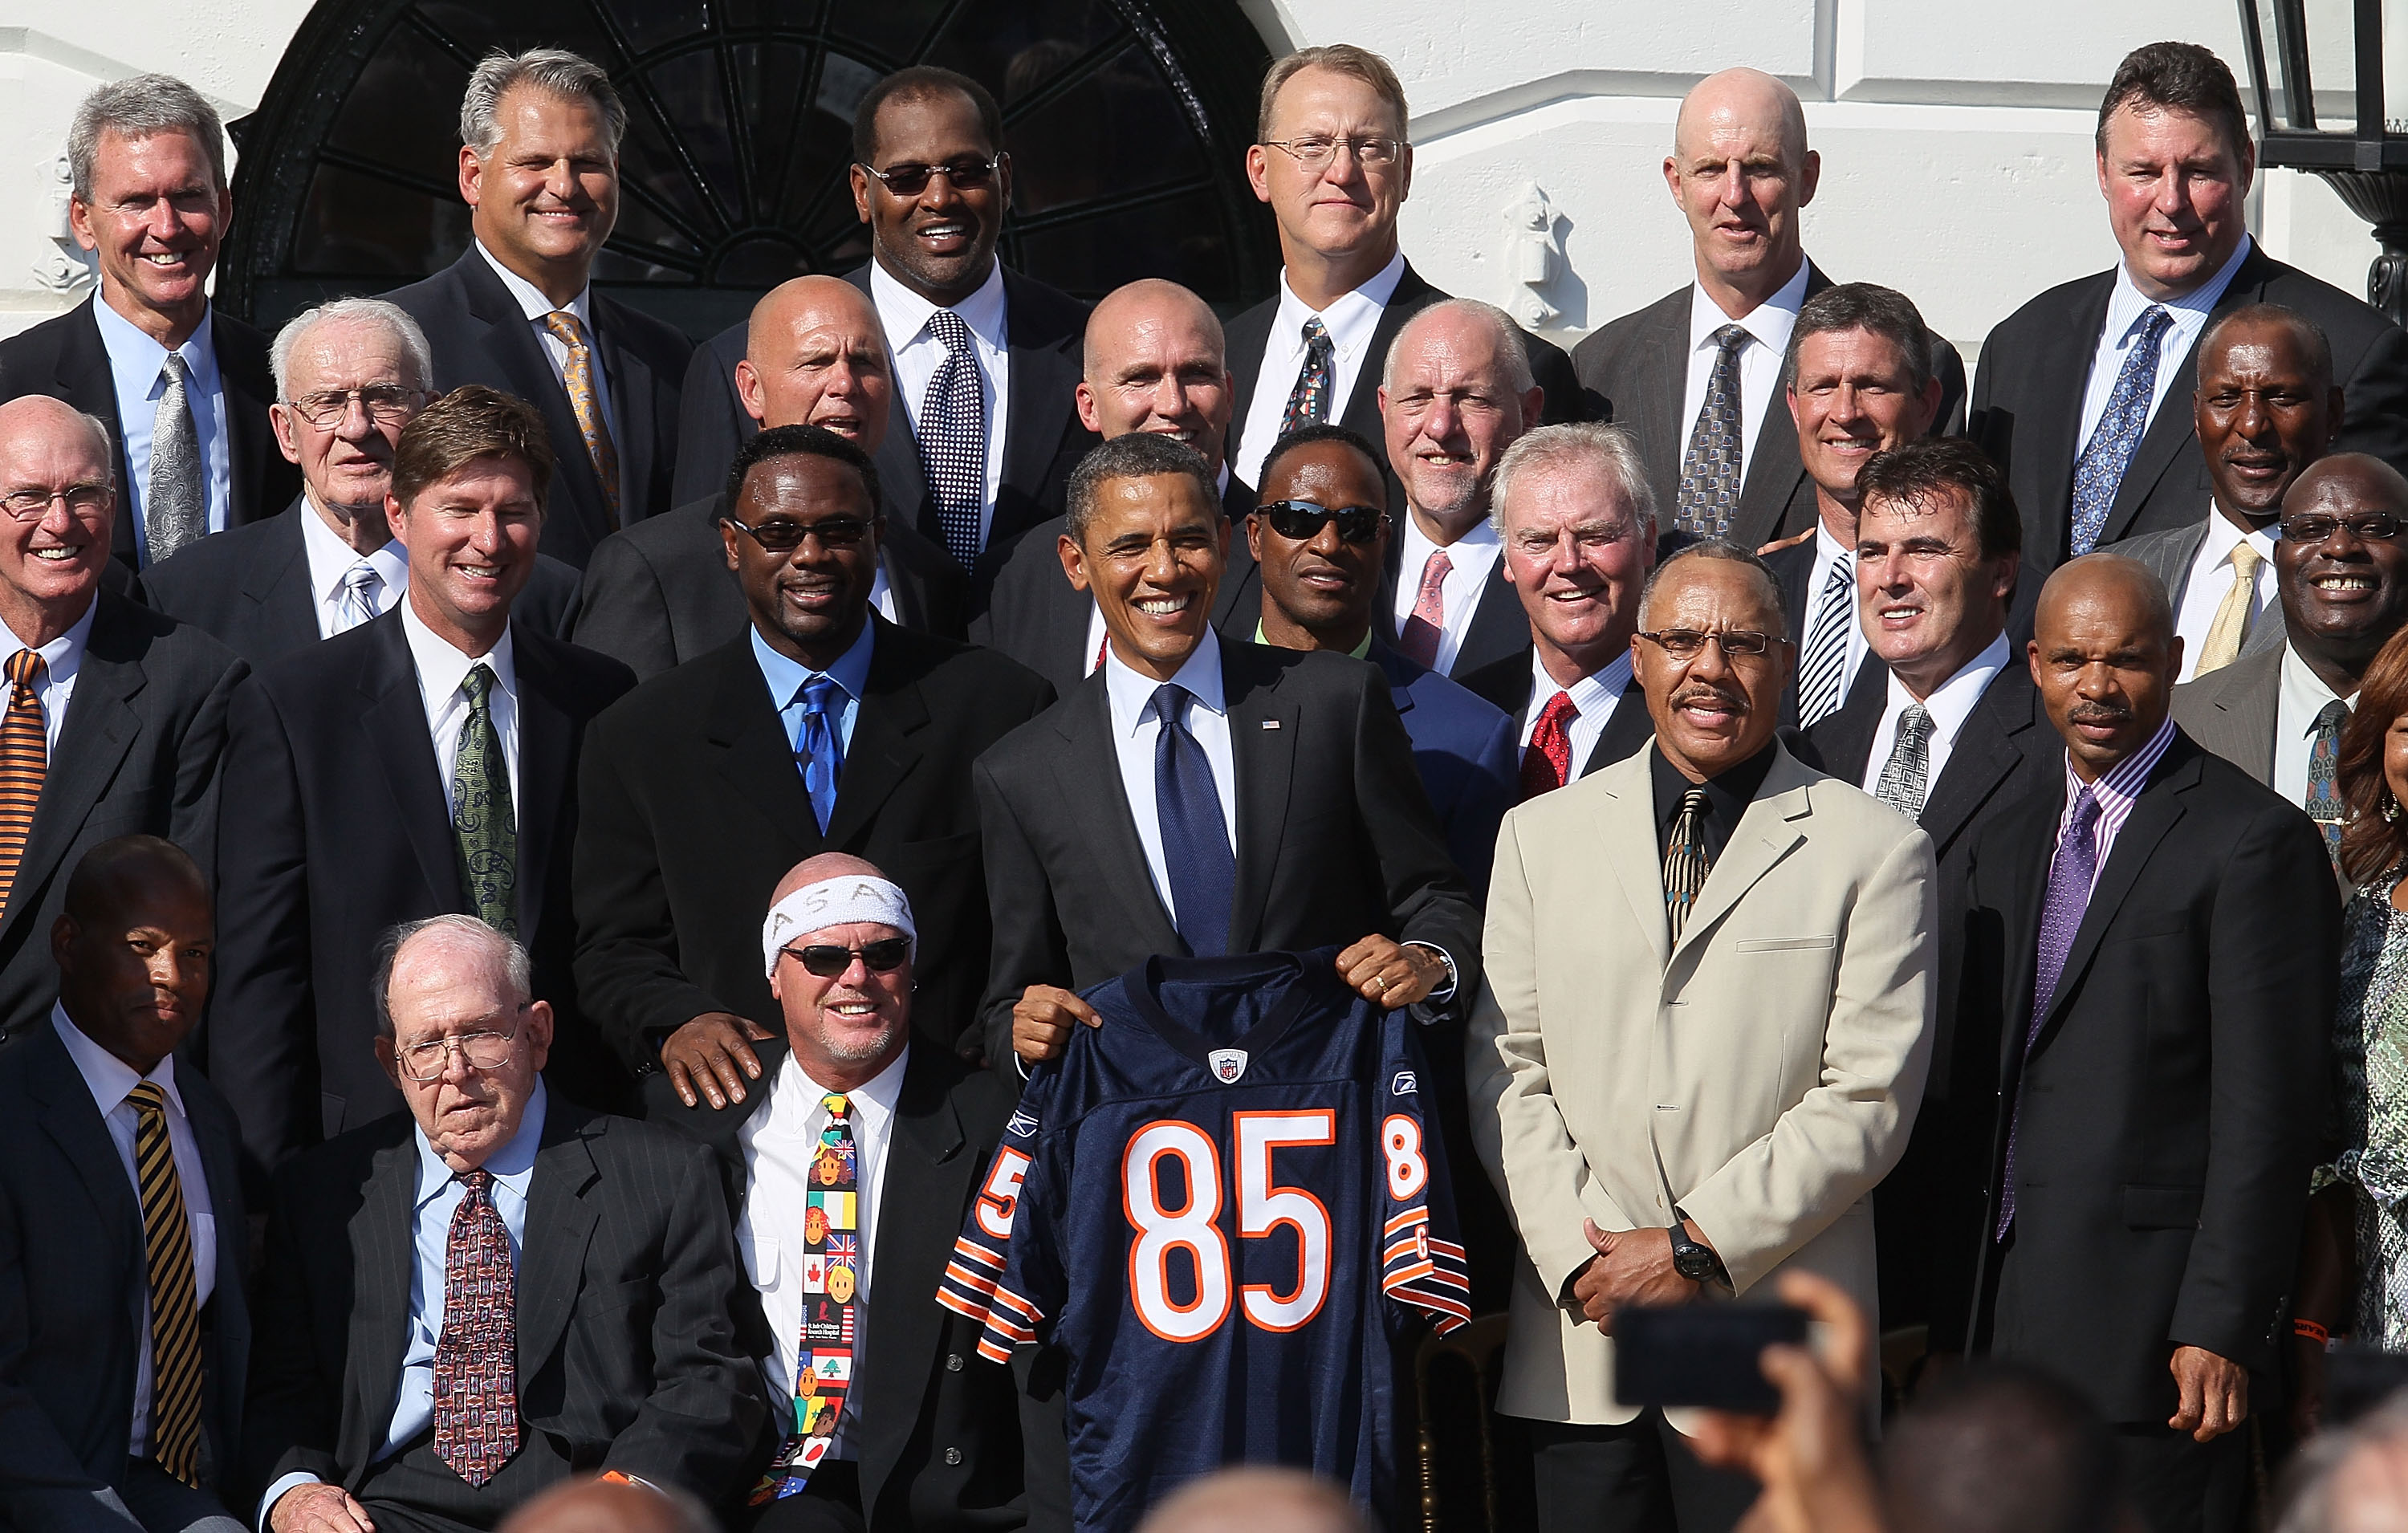 WASHINGTON, DC - OCTOBER 07: U.S. President Barack Obama stands with members of the the 1985 Super Bowl Champion Chicago Bears, during an event on the south lawn of the White House, on October 7, 2011 in Washington, DC. President Obama who is a Bears fan, realized the team never got to enjoy the customary ceremony given to the champions of the season, and invited the team to the White House. (Photo by Mark Wilson/Getty Images)